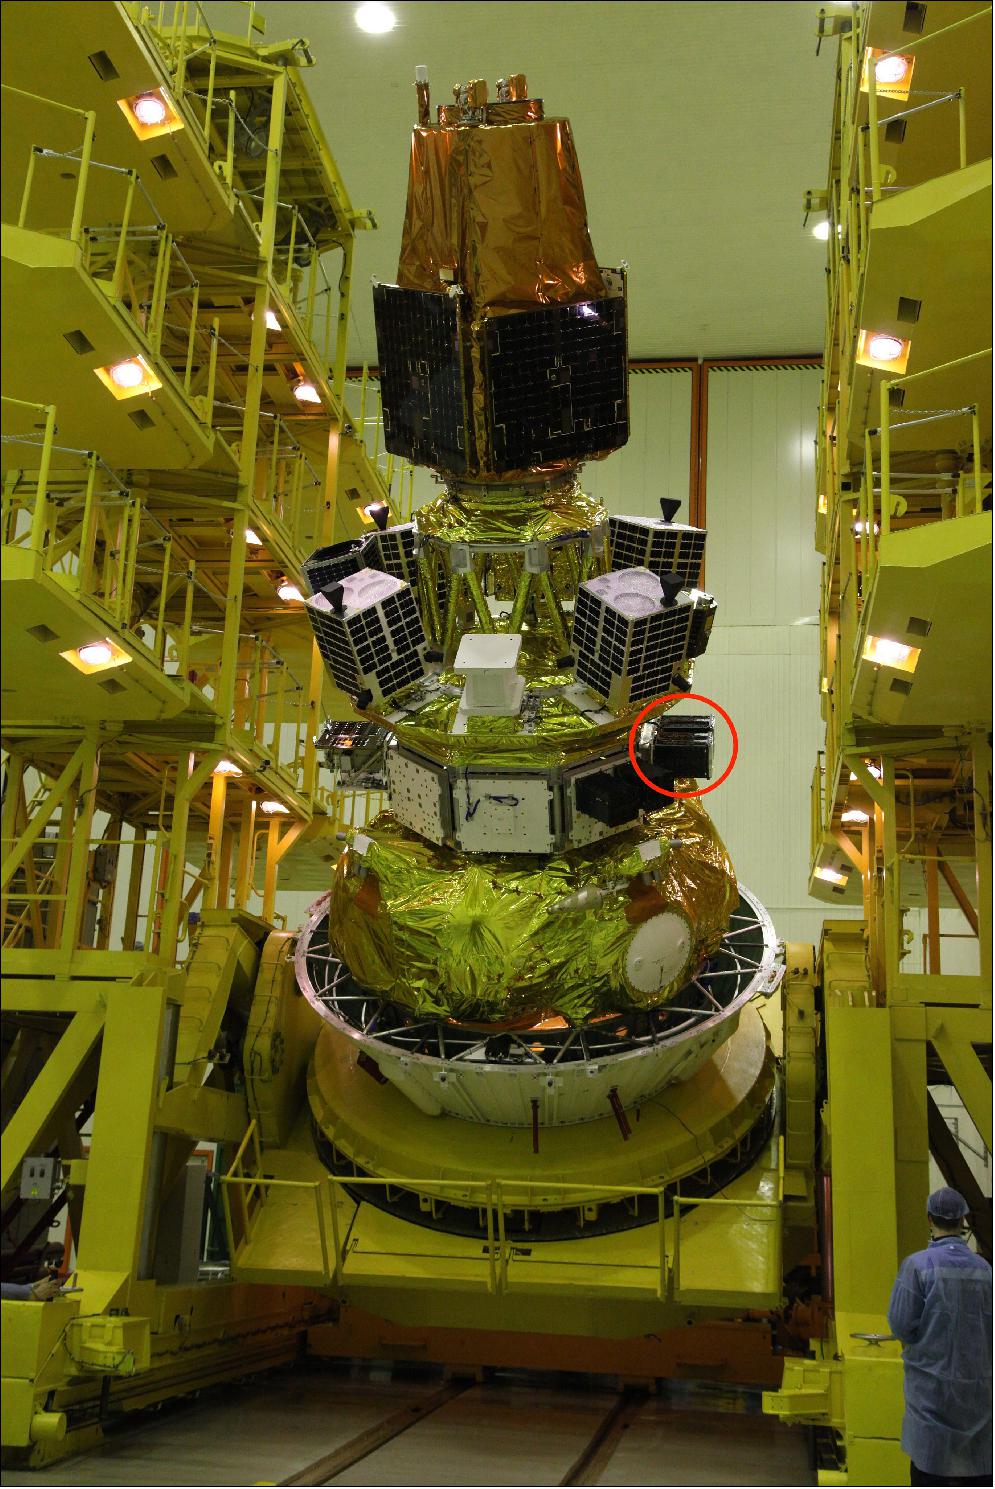 Figure 5: Image of the payload of the Soyuz 2 rocket, with the nanosatellite “Enxaneta” attached to it (marked with a red circle), image credit: GK Launch Services